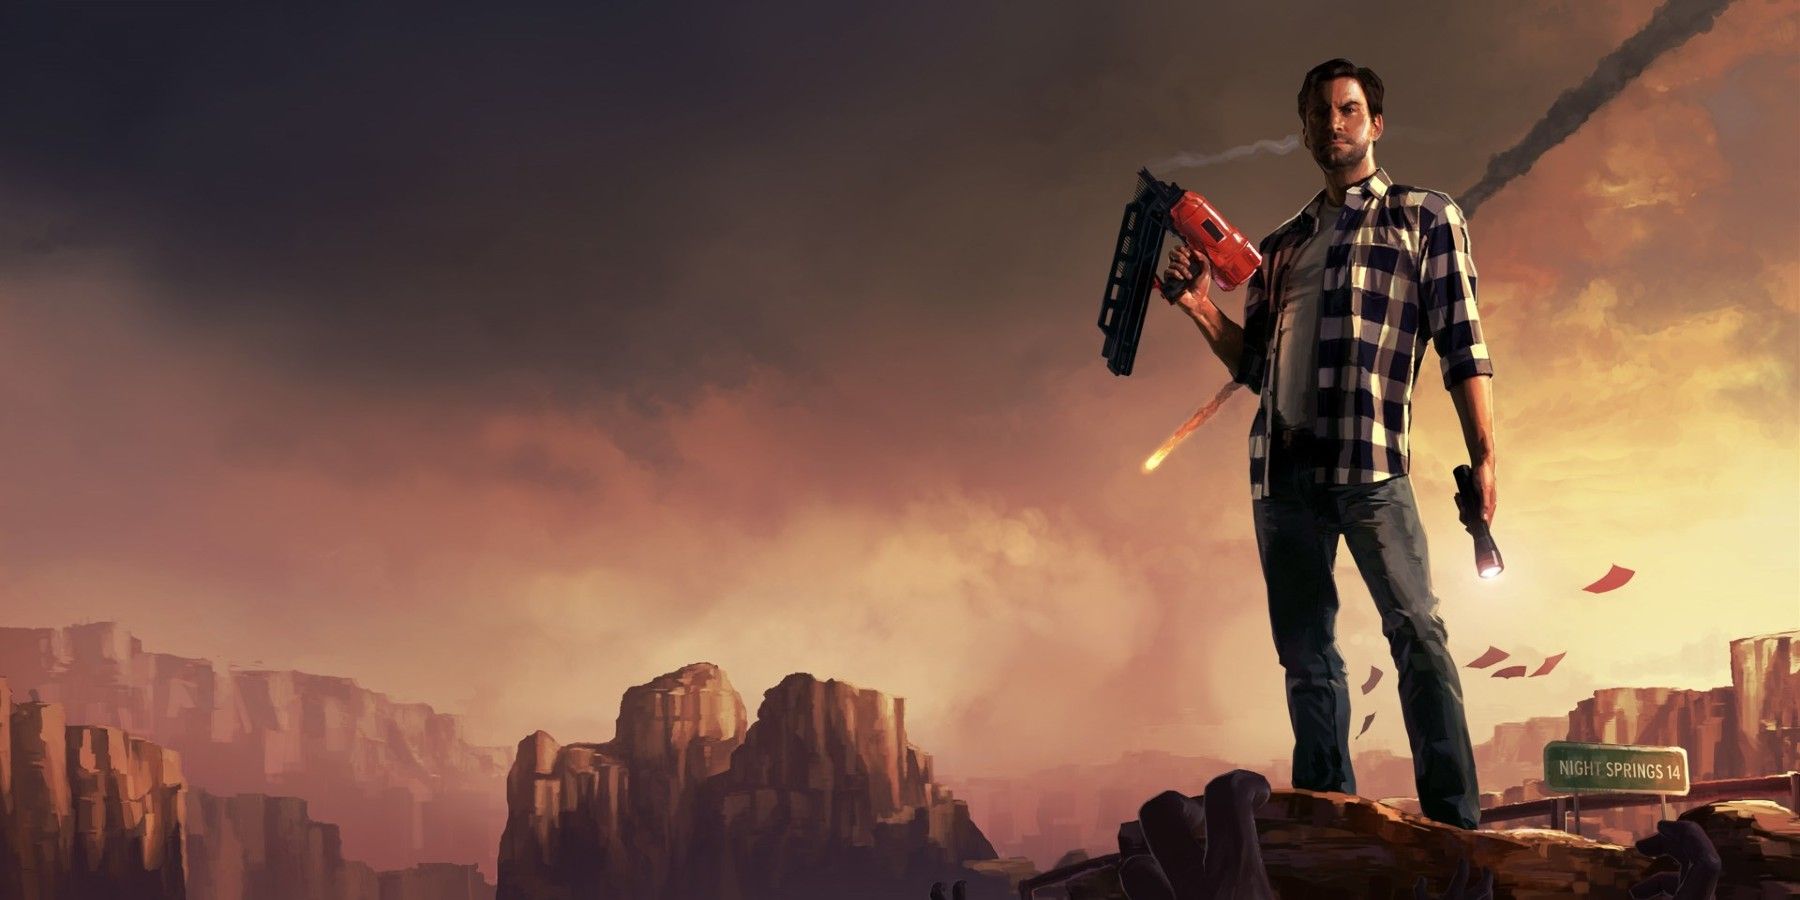 Alan-Wakes-American-Nightmare-Remaster-Remedy-Entertainment-Port-Xbox-PlayStation